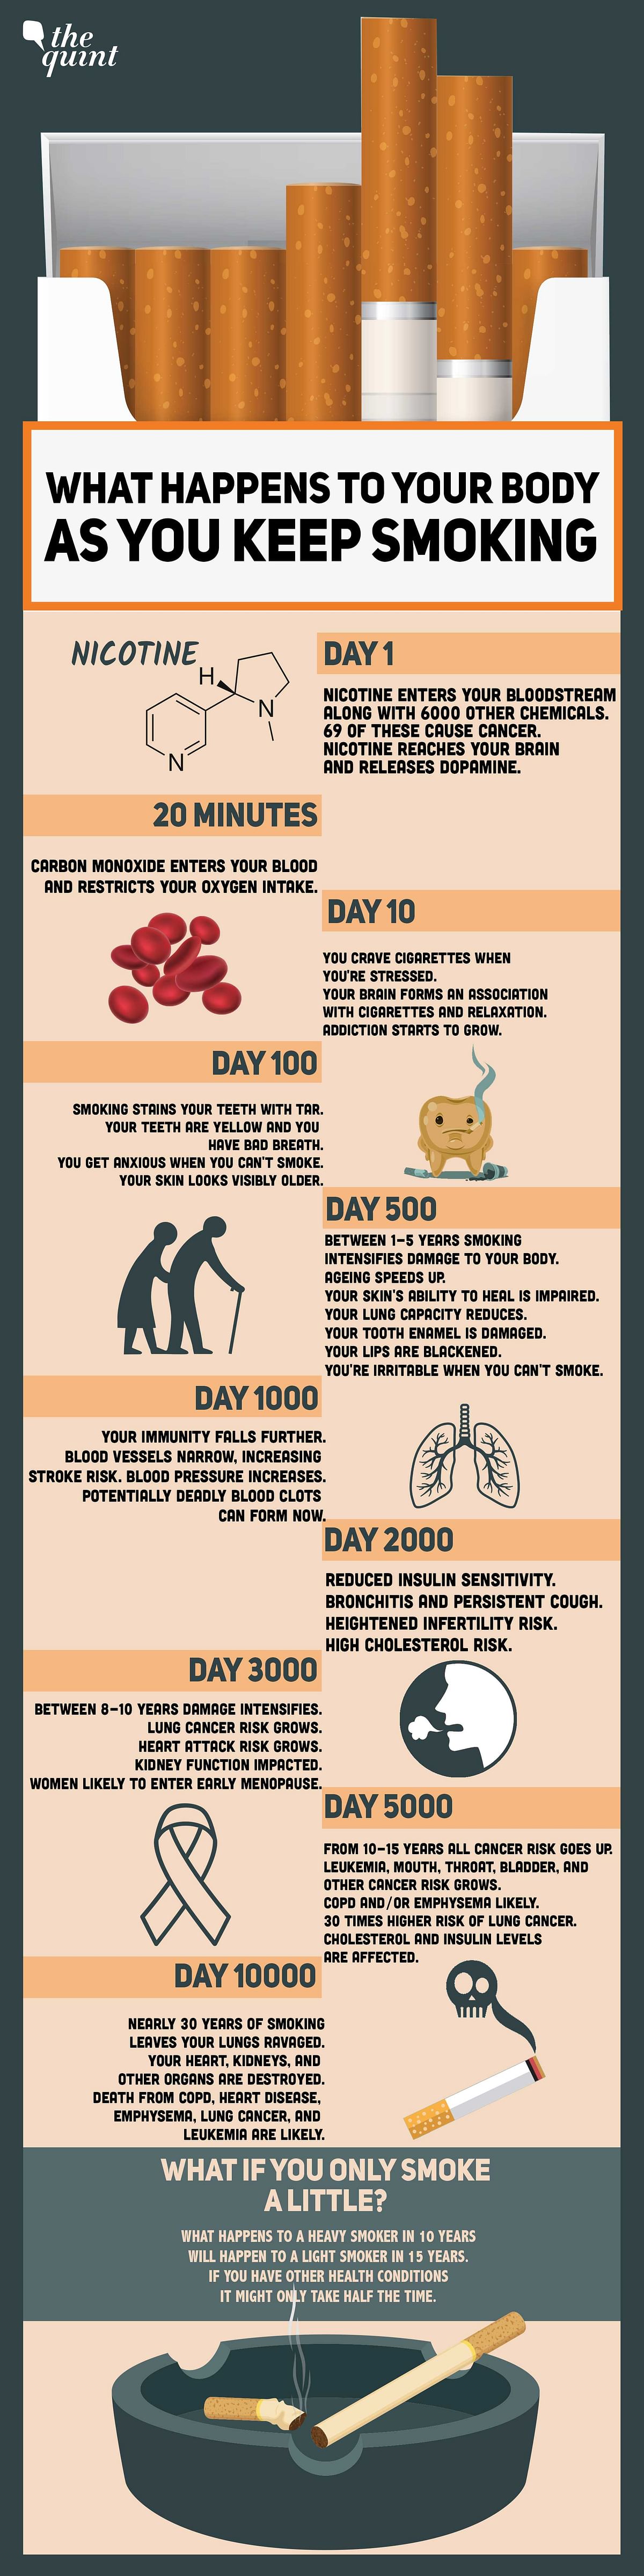 On World No Tobacco Day 2022, we drew up a timeline of what happens to your body when you keep smoking cigarettes.